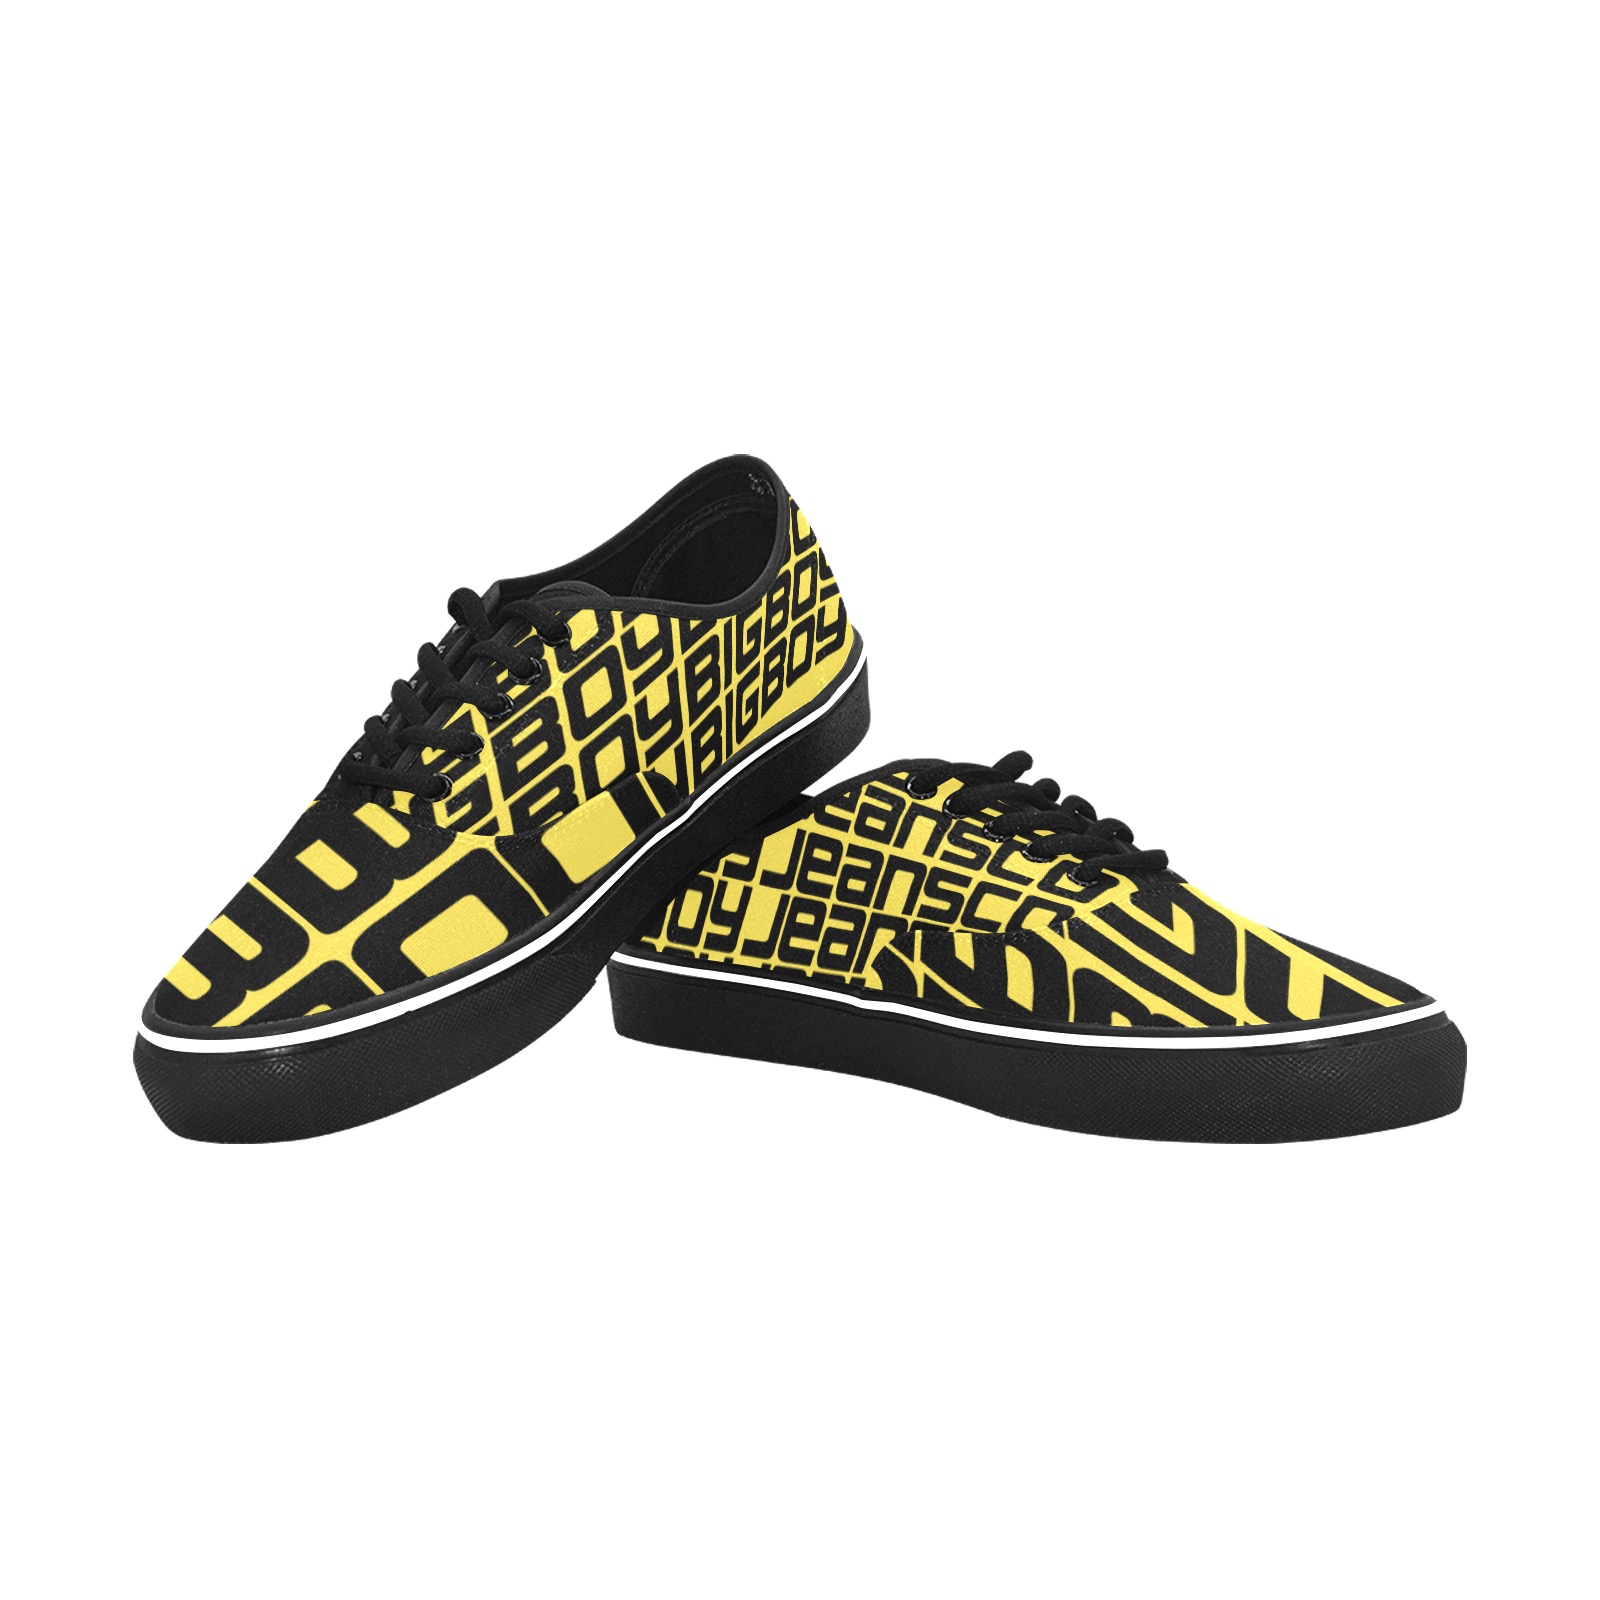 BXB LOWS BLACK AND YELLOW Classic Men's Canvas Low Top Shoes (Model E001-4)